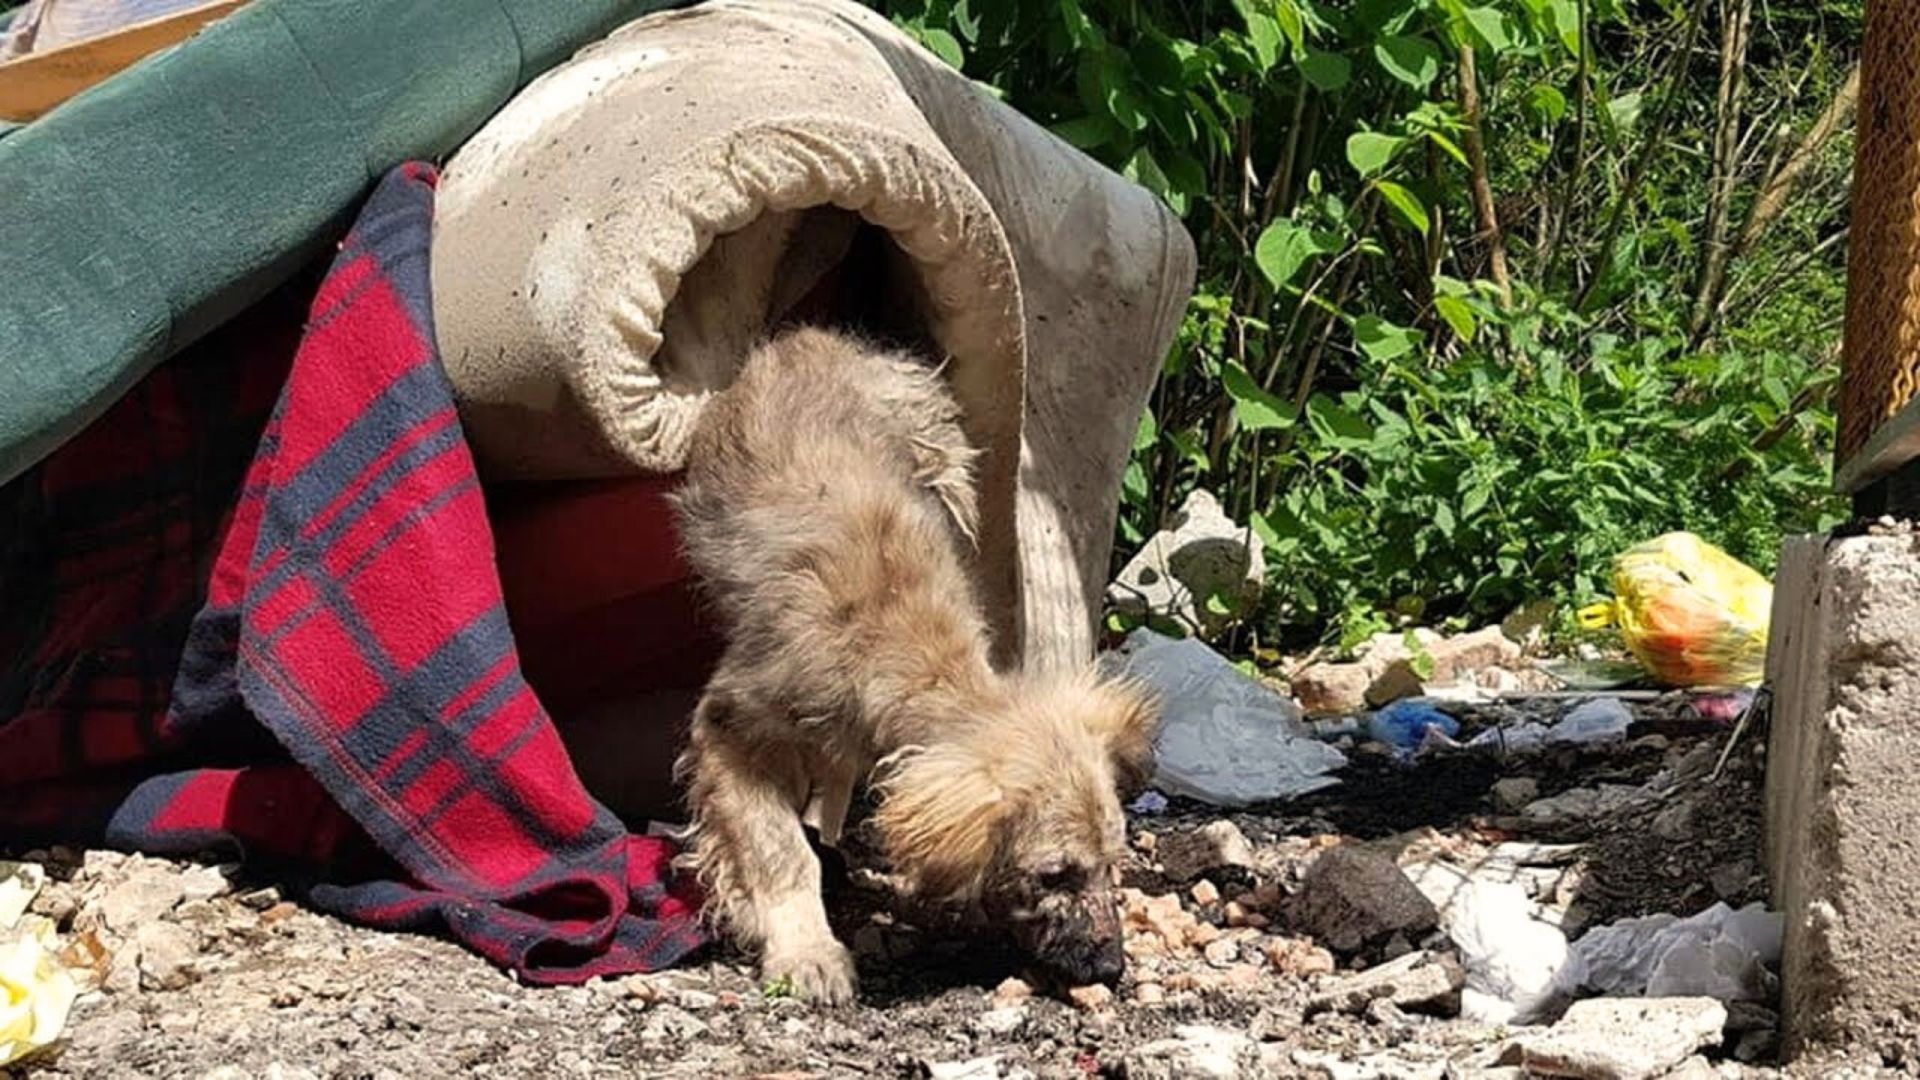 A Scared And Sick Puppy Dumped In The Trash Meets A Kind Human Who Ends Up Changing Her Life